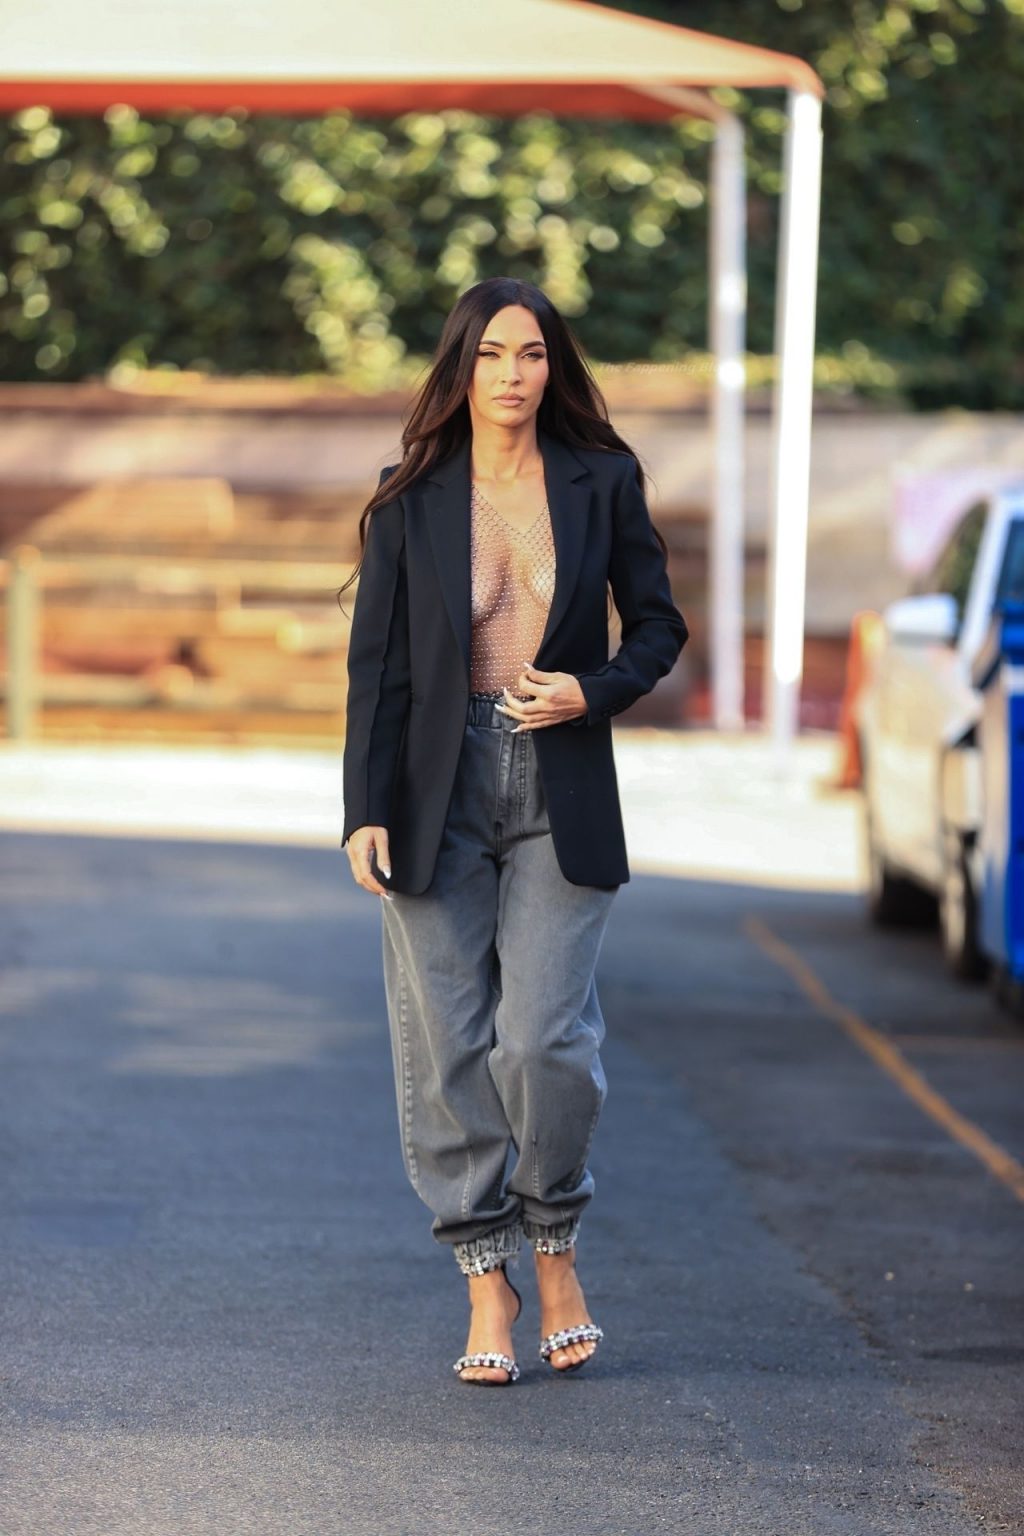 Megan Fox Leaves Little to Imagination While Leaving a Photoshoot in LA (19 Photos)